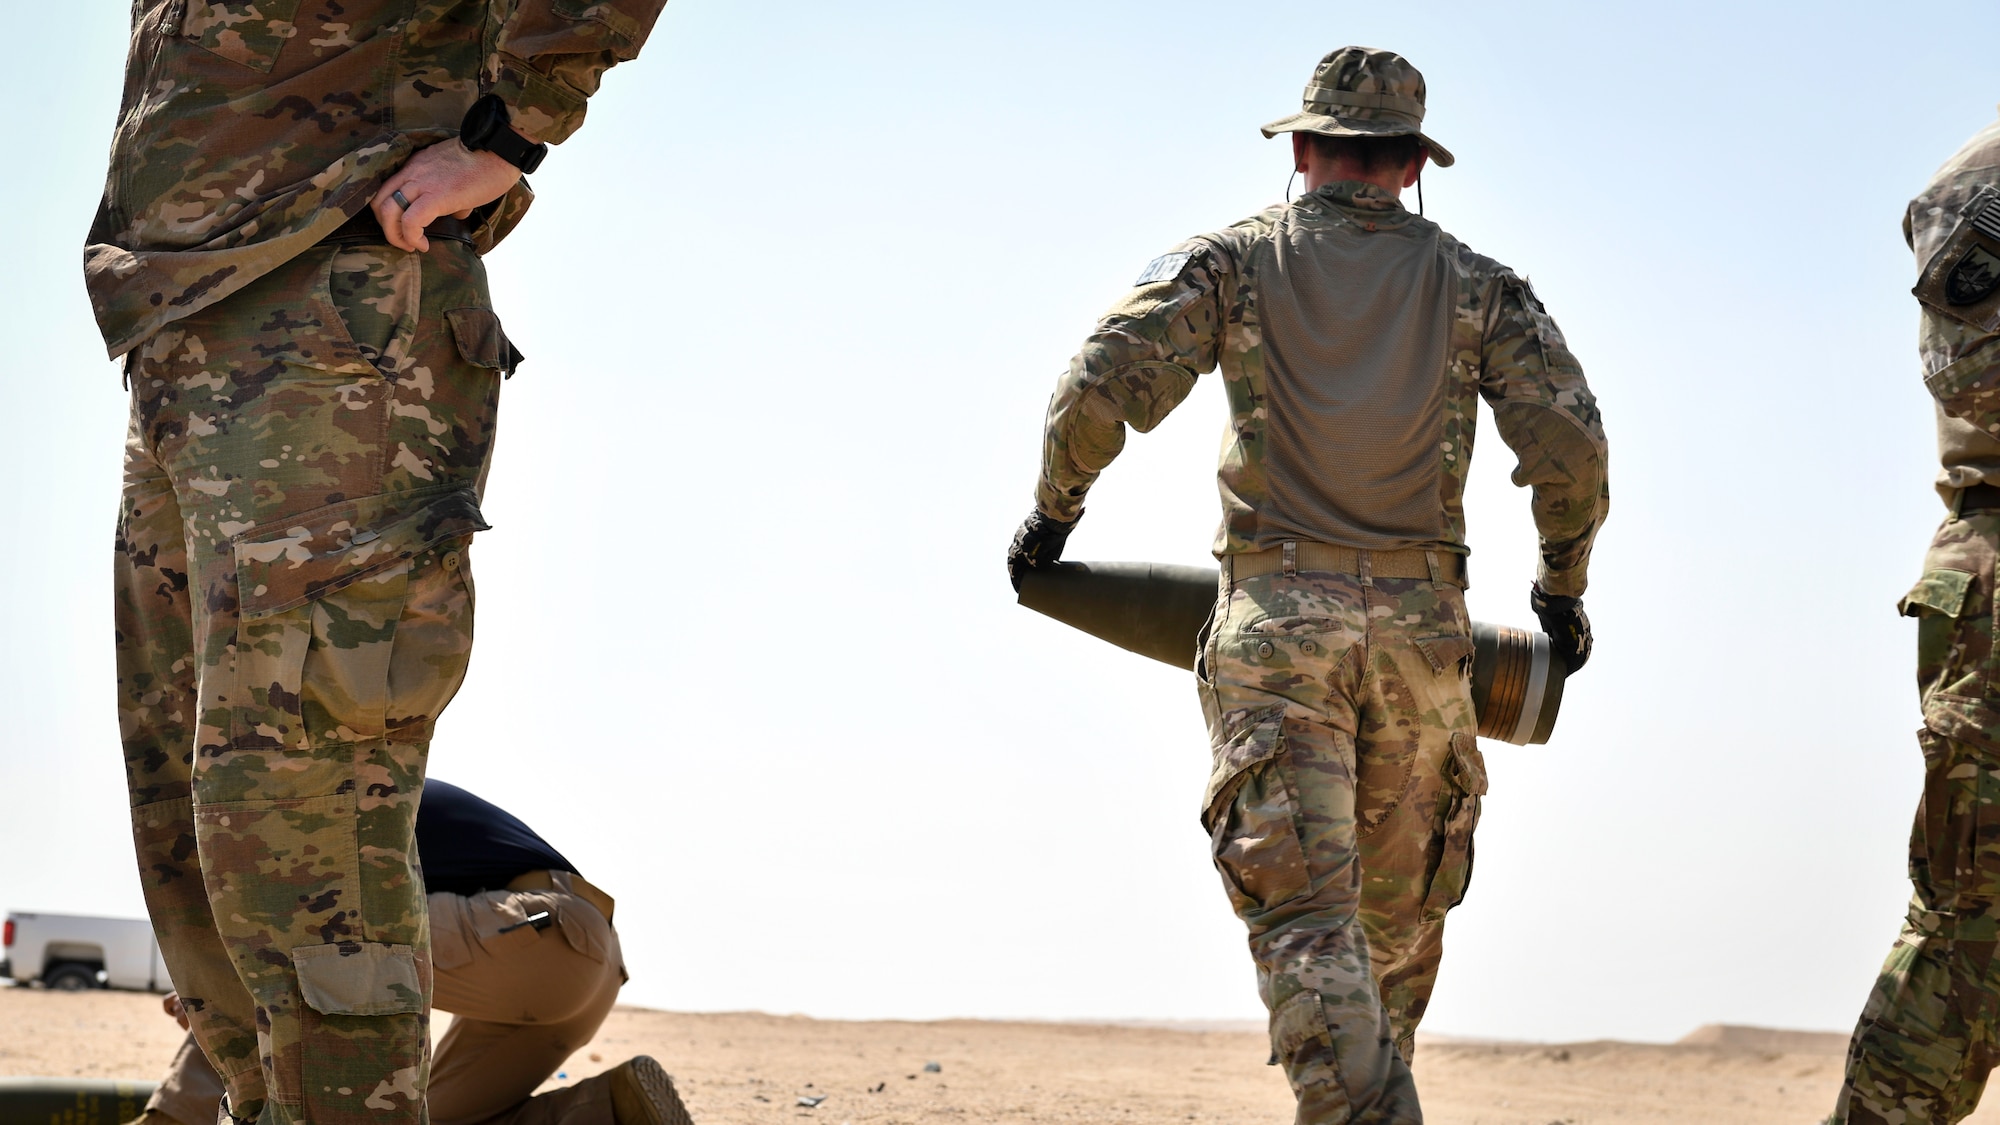 U.S. Army Sgt. 1st Class Jesse Harris, 744th Ordnance Company operations sergeant, carries a 155MM insensitive high explosive round before a munitions disposal training at the Udari Range, Kuwait, Sept. 30, 2019. The training was designed to demonstrate proper insensitive munitions disposal by using C-4 high explosives to properly detonate and consume the 155MM artillery round.